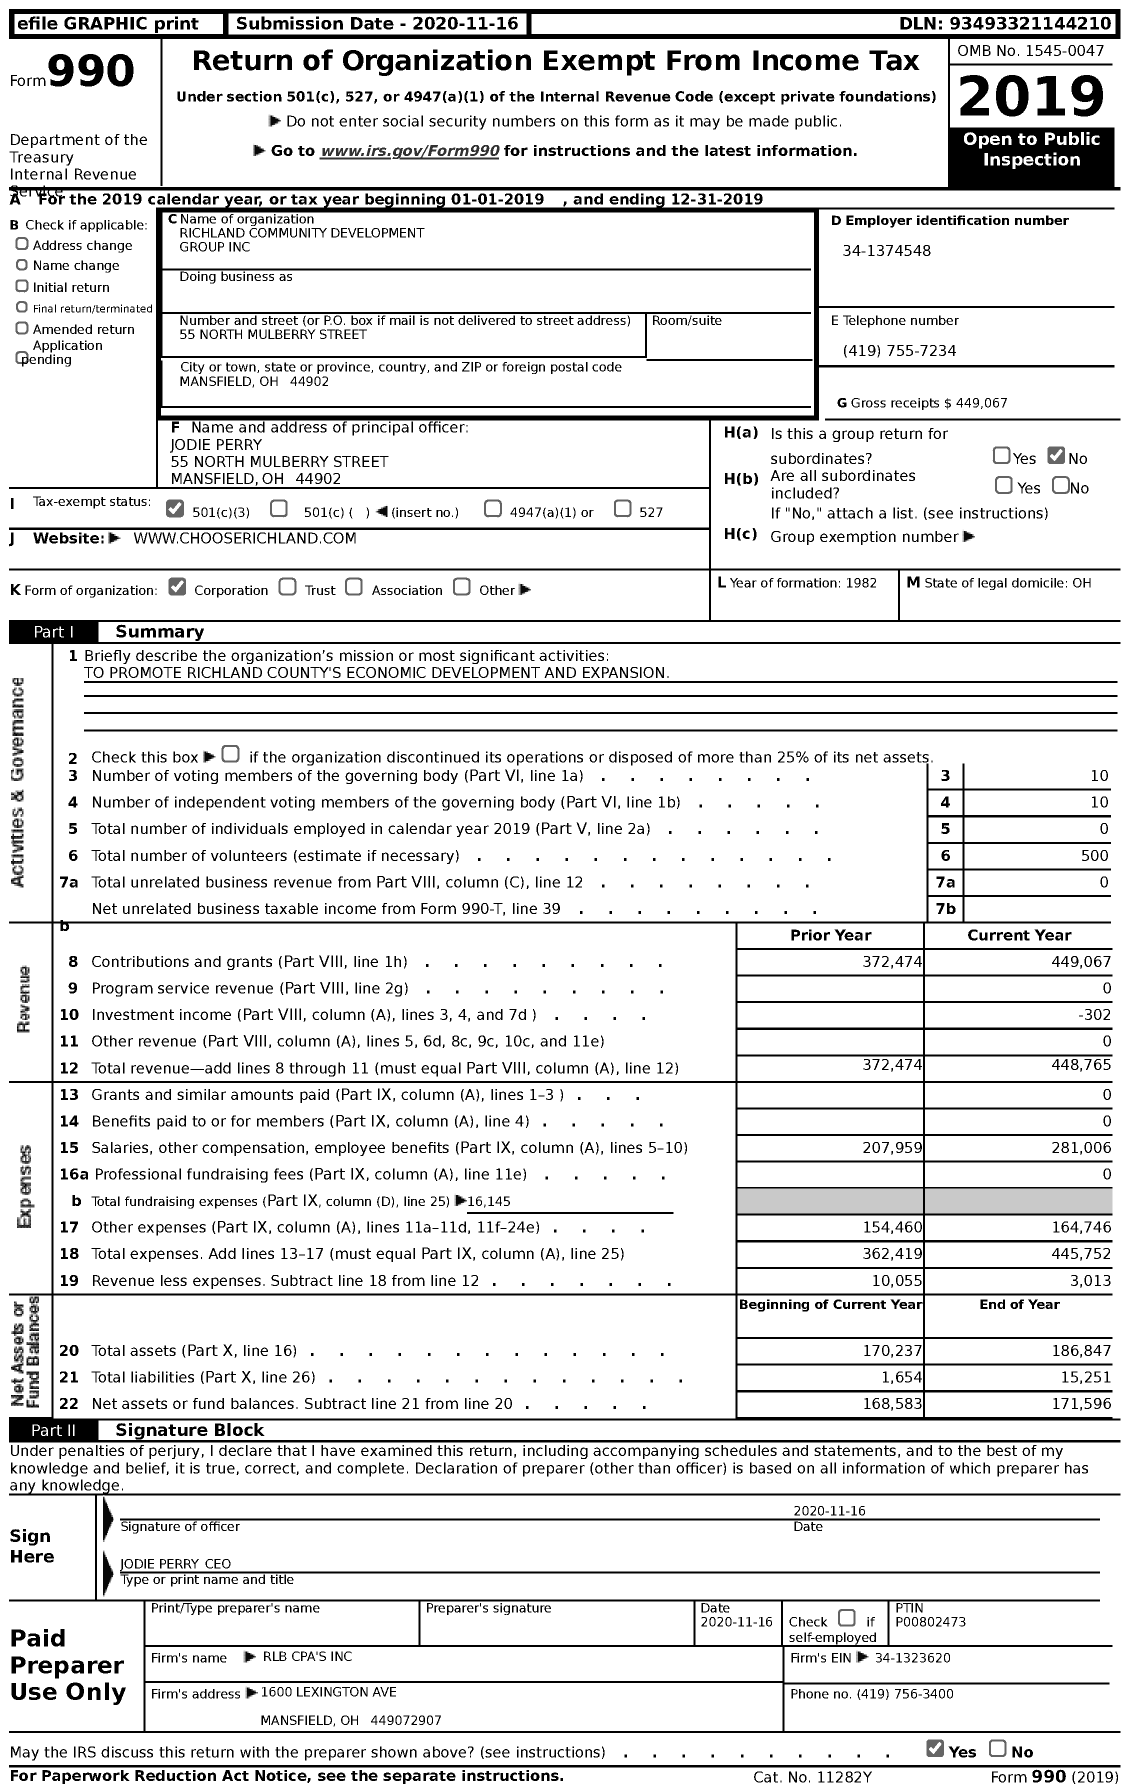 Image of first page of 2019 Form 990 for Richland Community Development Group